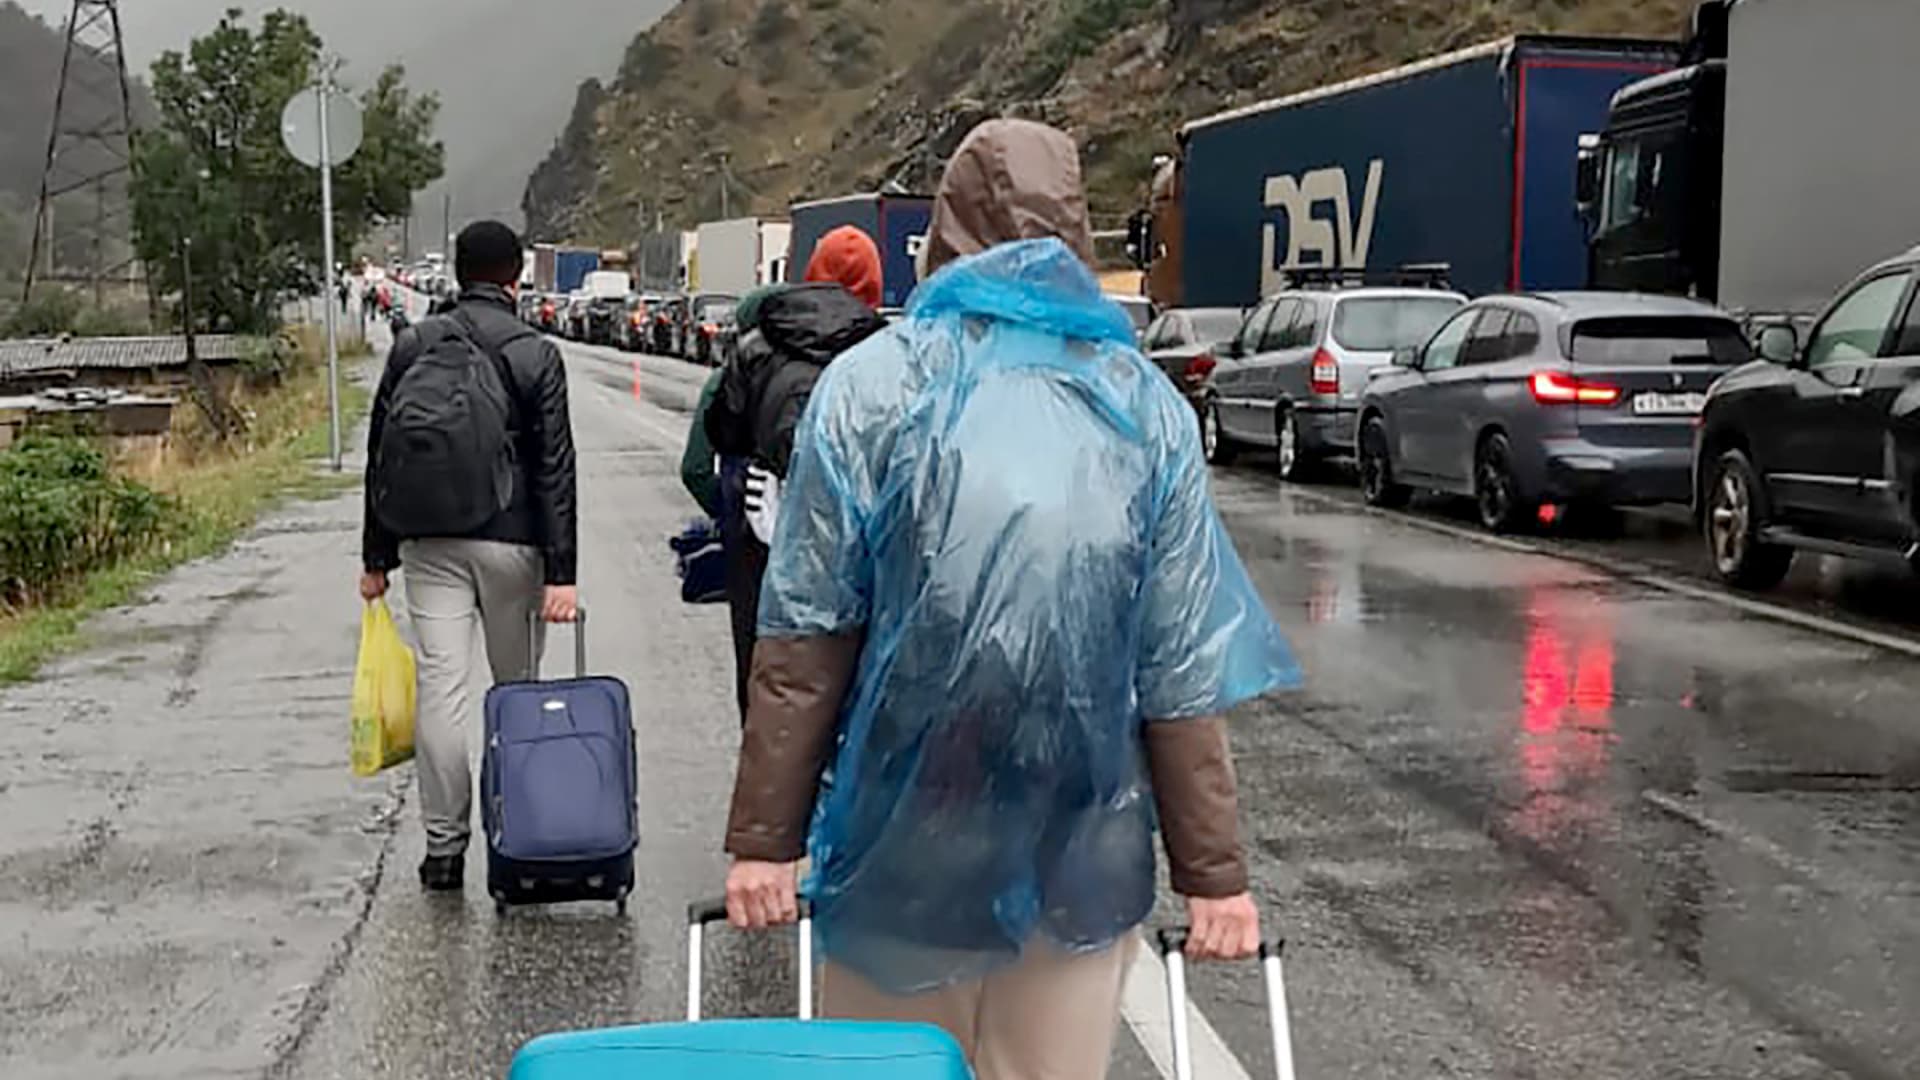 People carrying luggage walk past vehicles with Russian license plates on the Russian side of the border towards the Nizhniy Lars customs checkpoint between Georgia and Russia some 25 km outside the town of Vladikavkaz, on September 25, 2022.